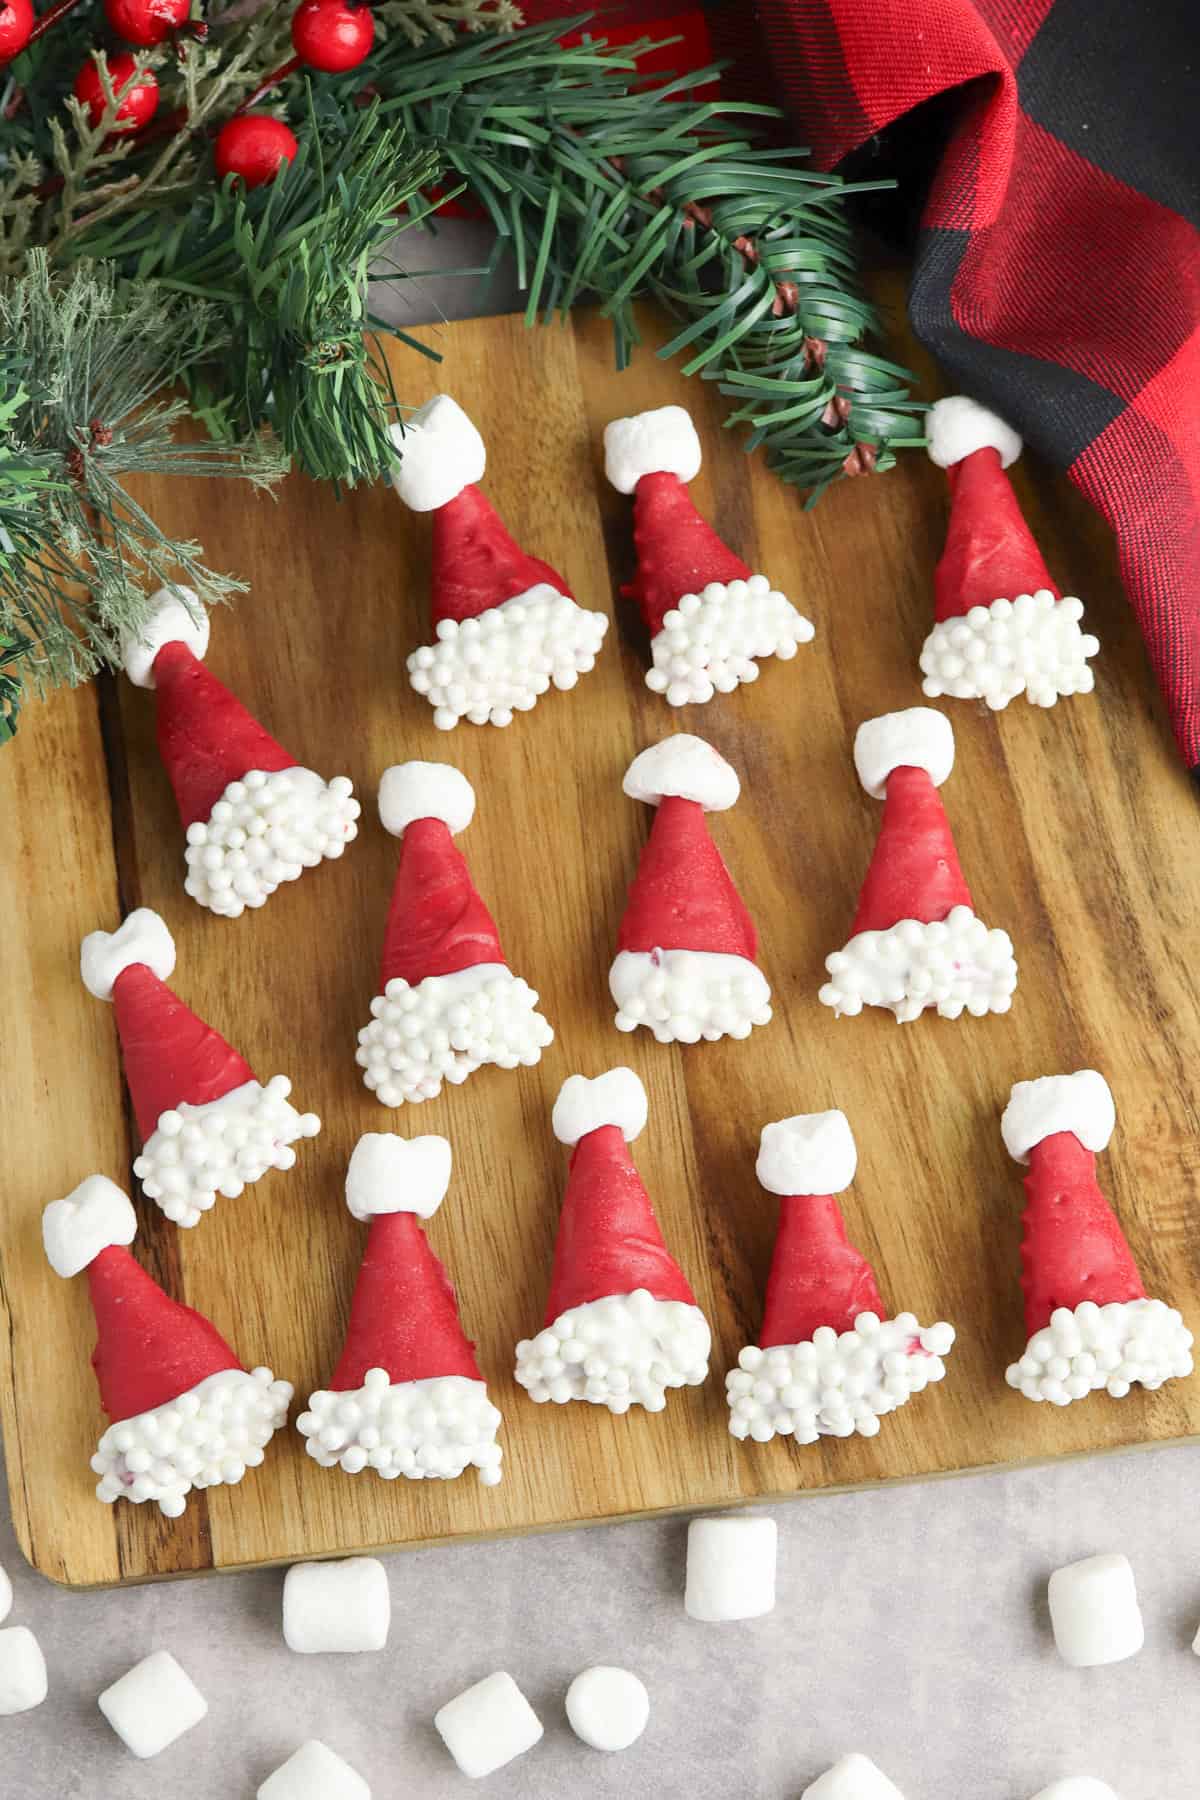 Easy no-bake Santa hat Bugles, bugle corn snacks dipped in red candy melts and decorated with white sprinkles and mini mashmallows to look like cute little santa hats!